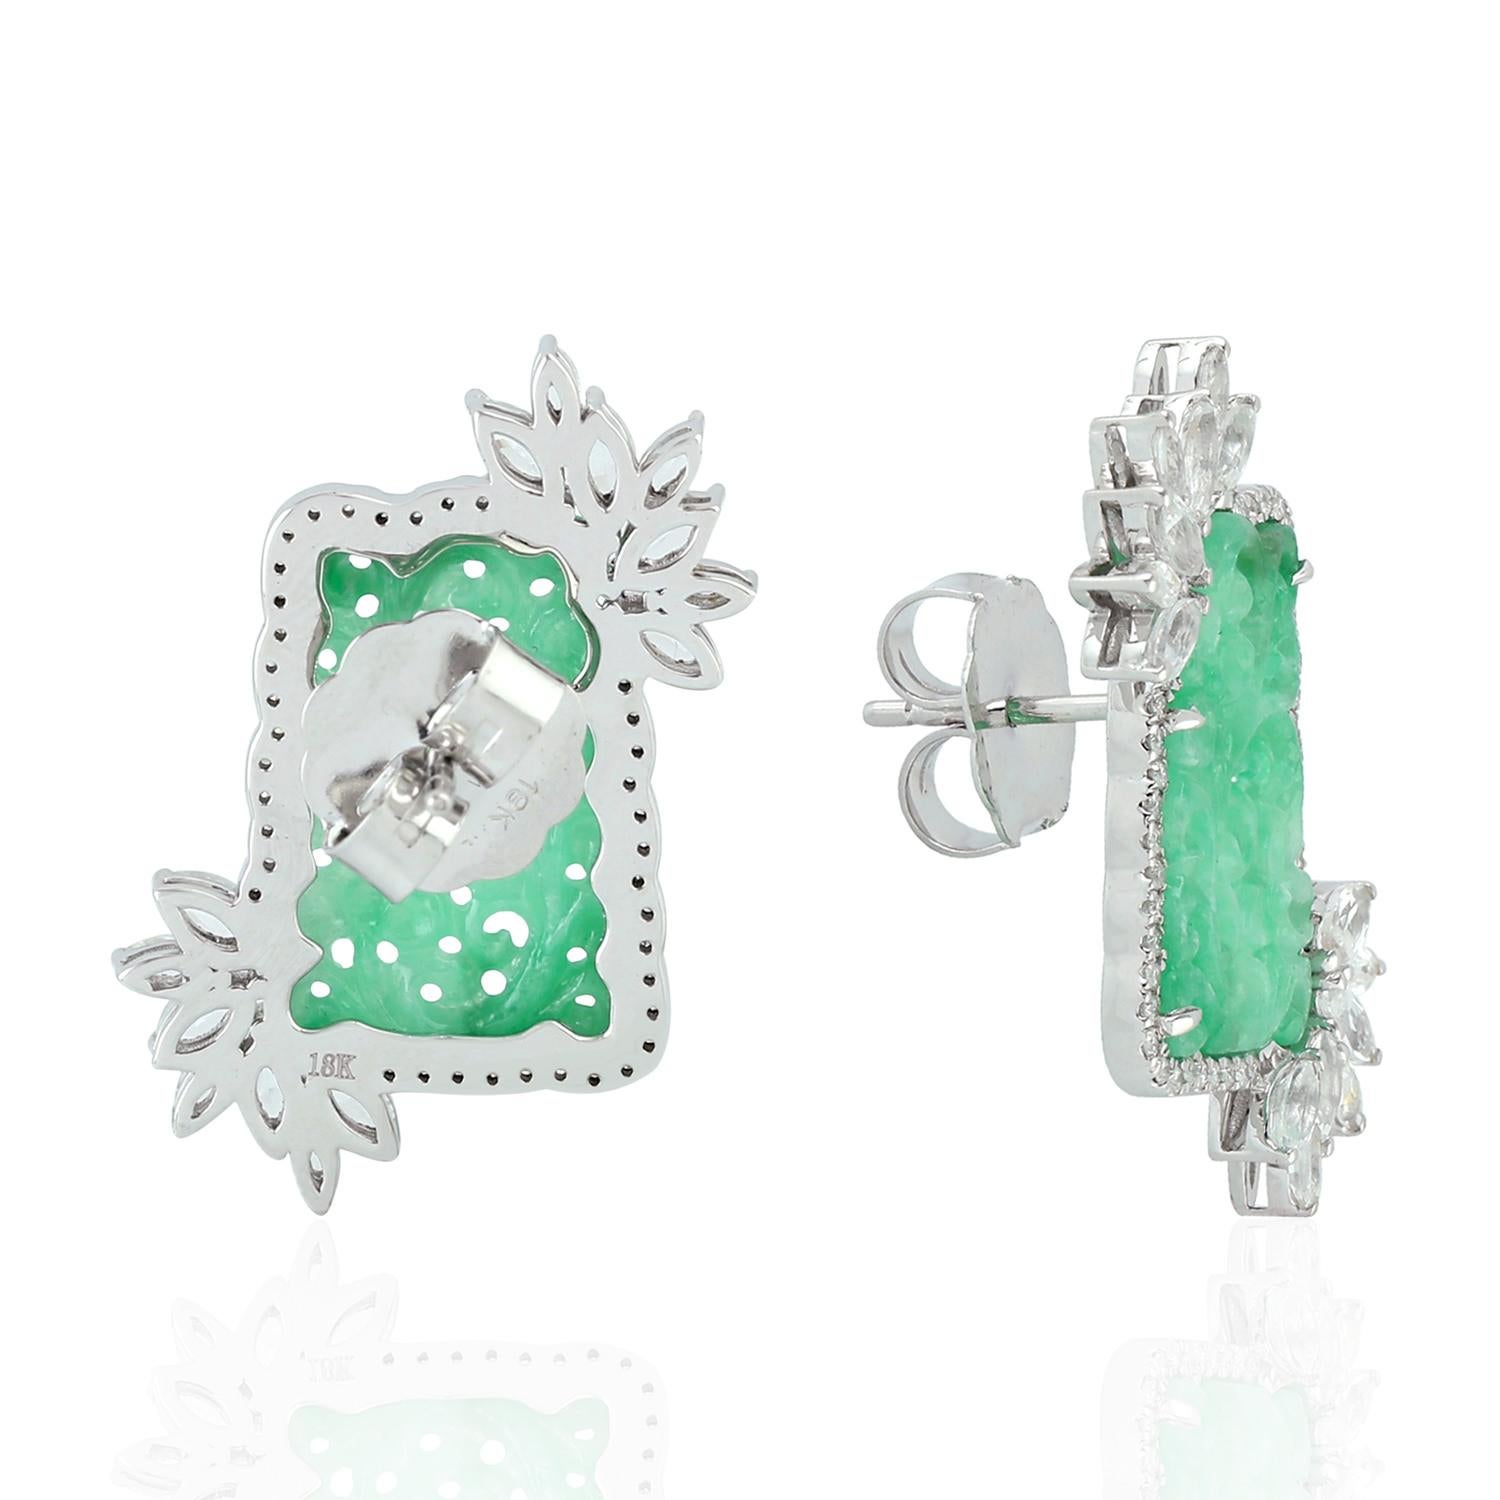 Contemporary Carved Jade Stud Earrings With White Sapphire & Diamonds Made In 18k White Gold For Sale